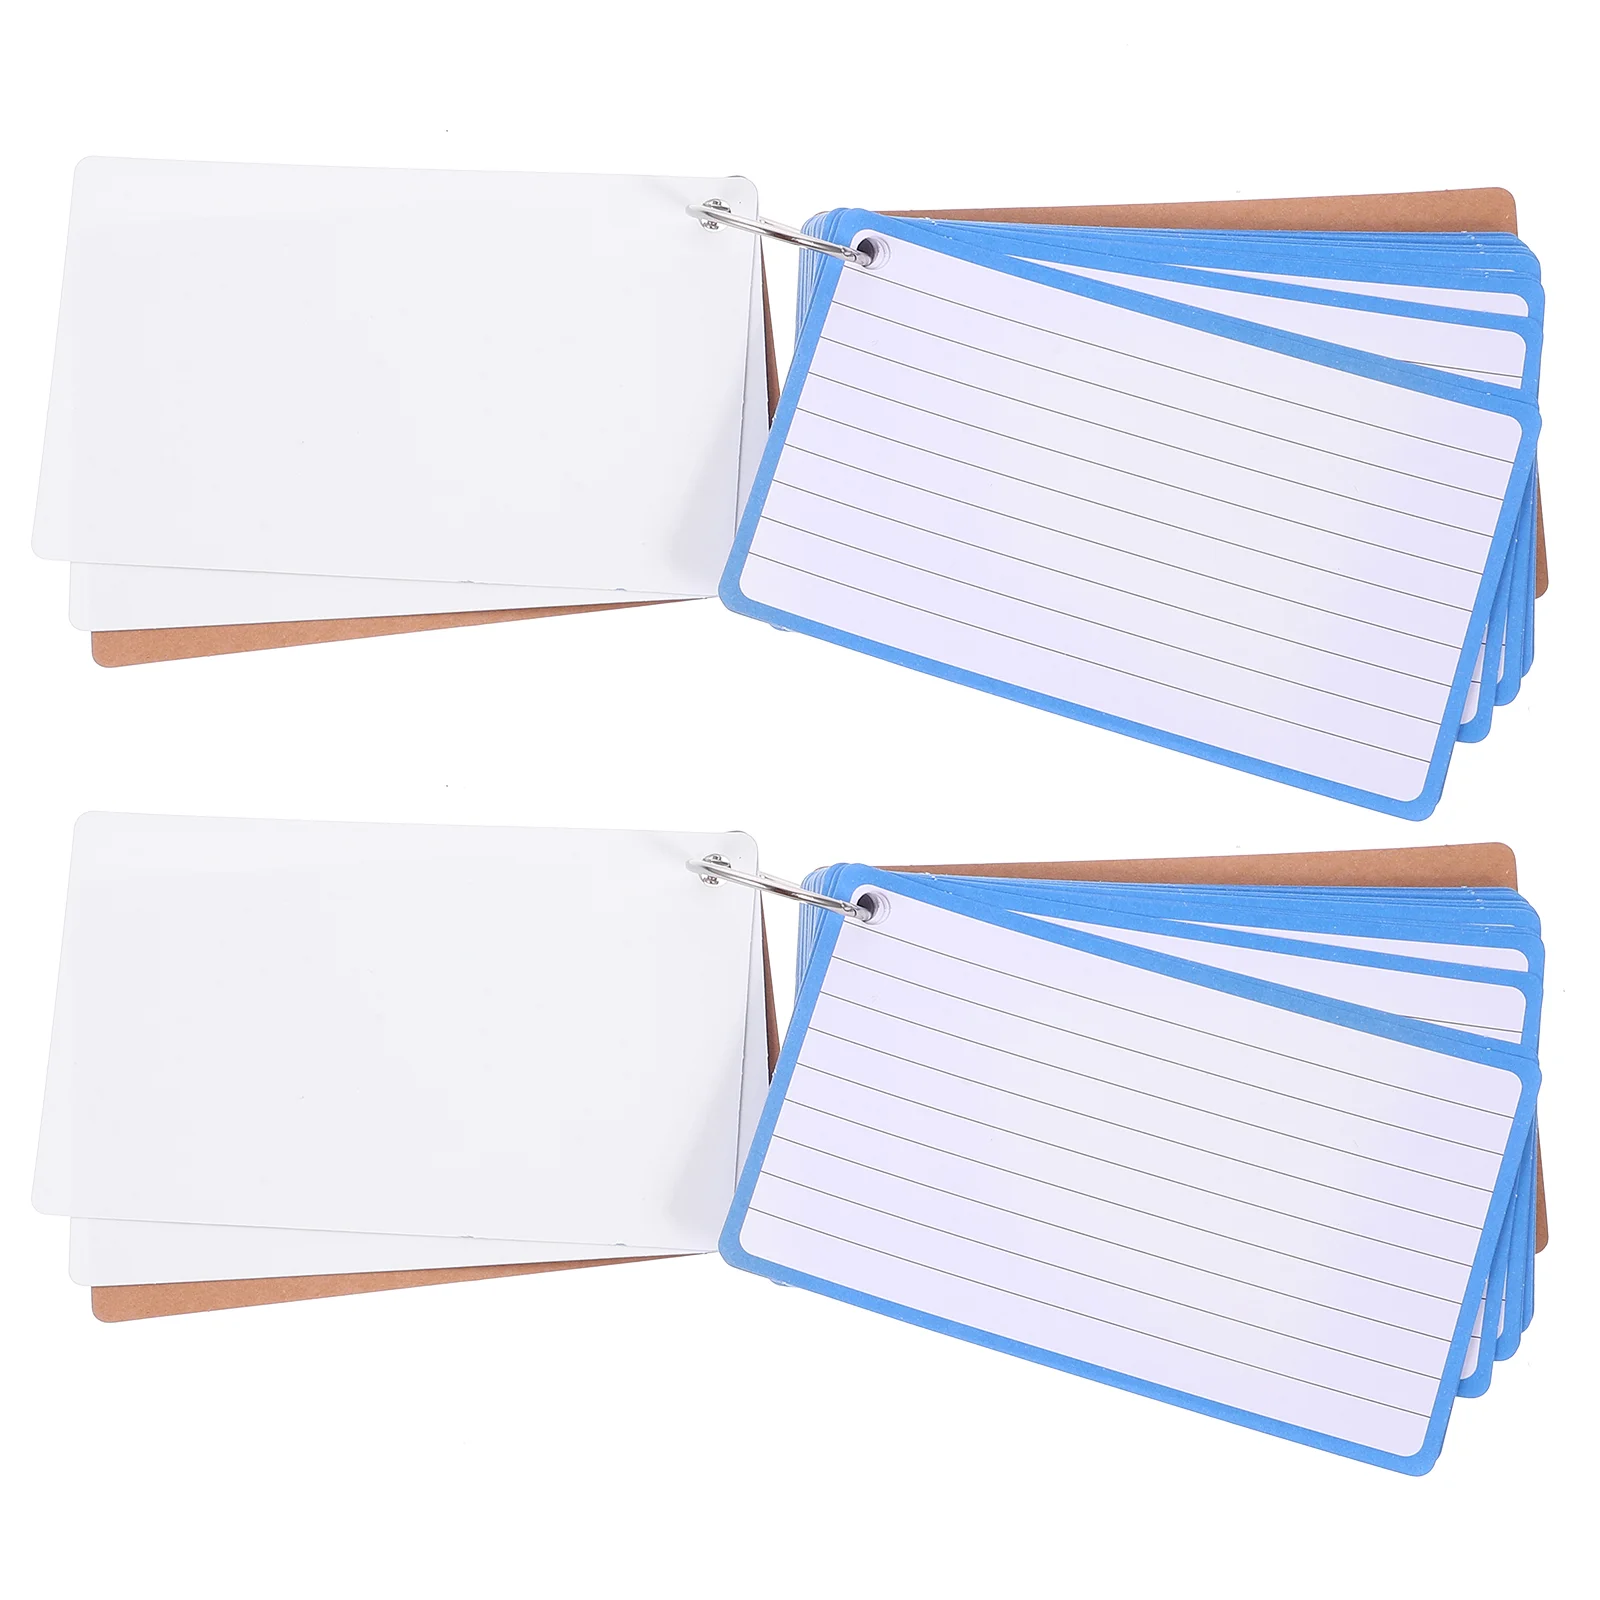 2 Books of Memo Blank Cards Index Cards Lined Cards Diy Graffiti Cards Colored Index Card 200pcs cards white blank retro diy kraft paper blank card diy graffiti word cards gift greetings vintage card message note